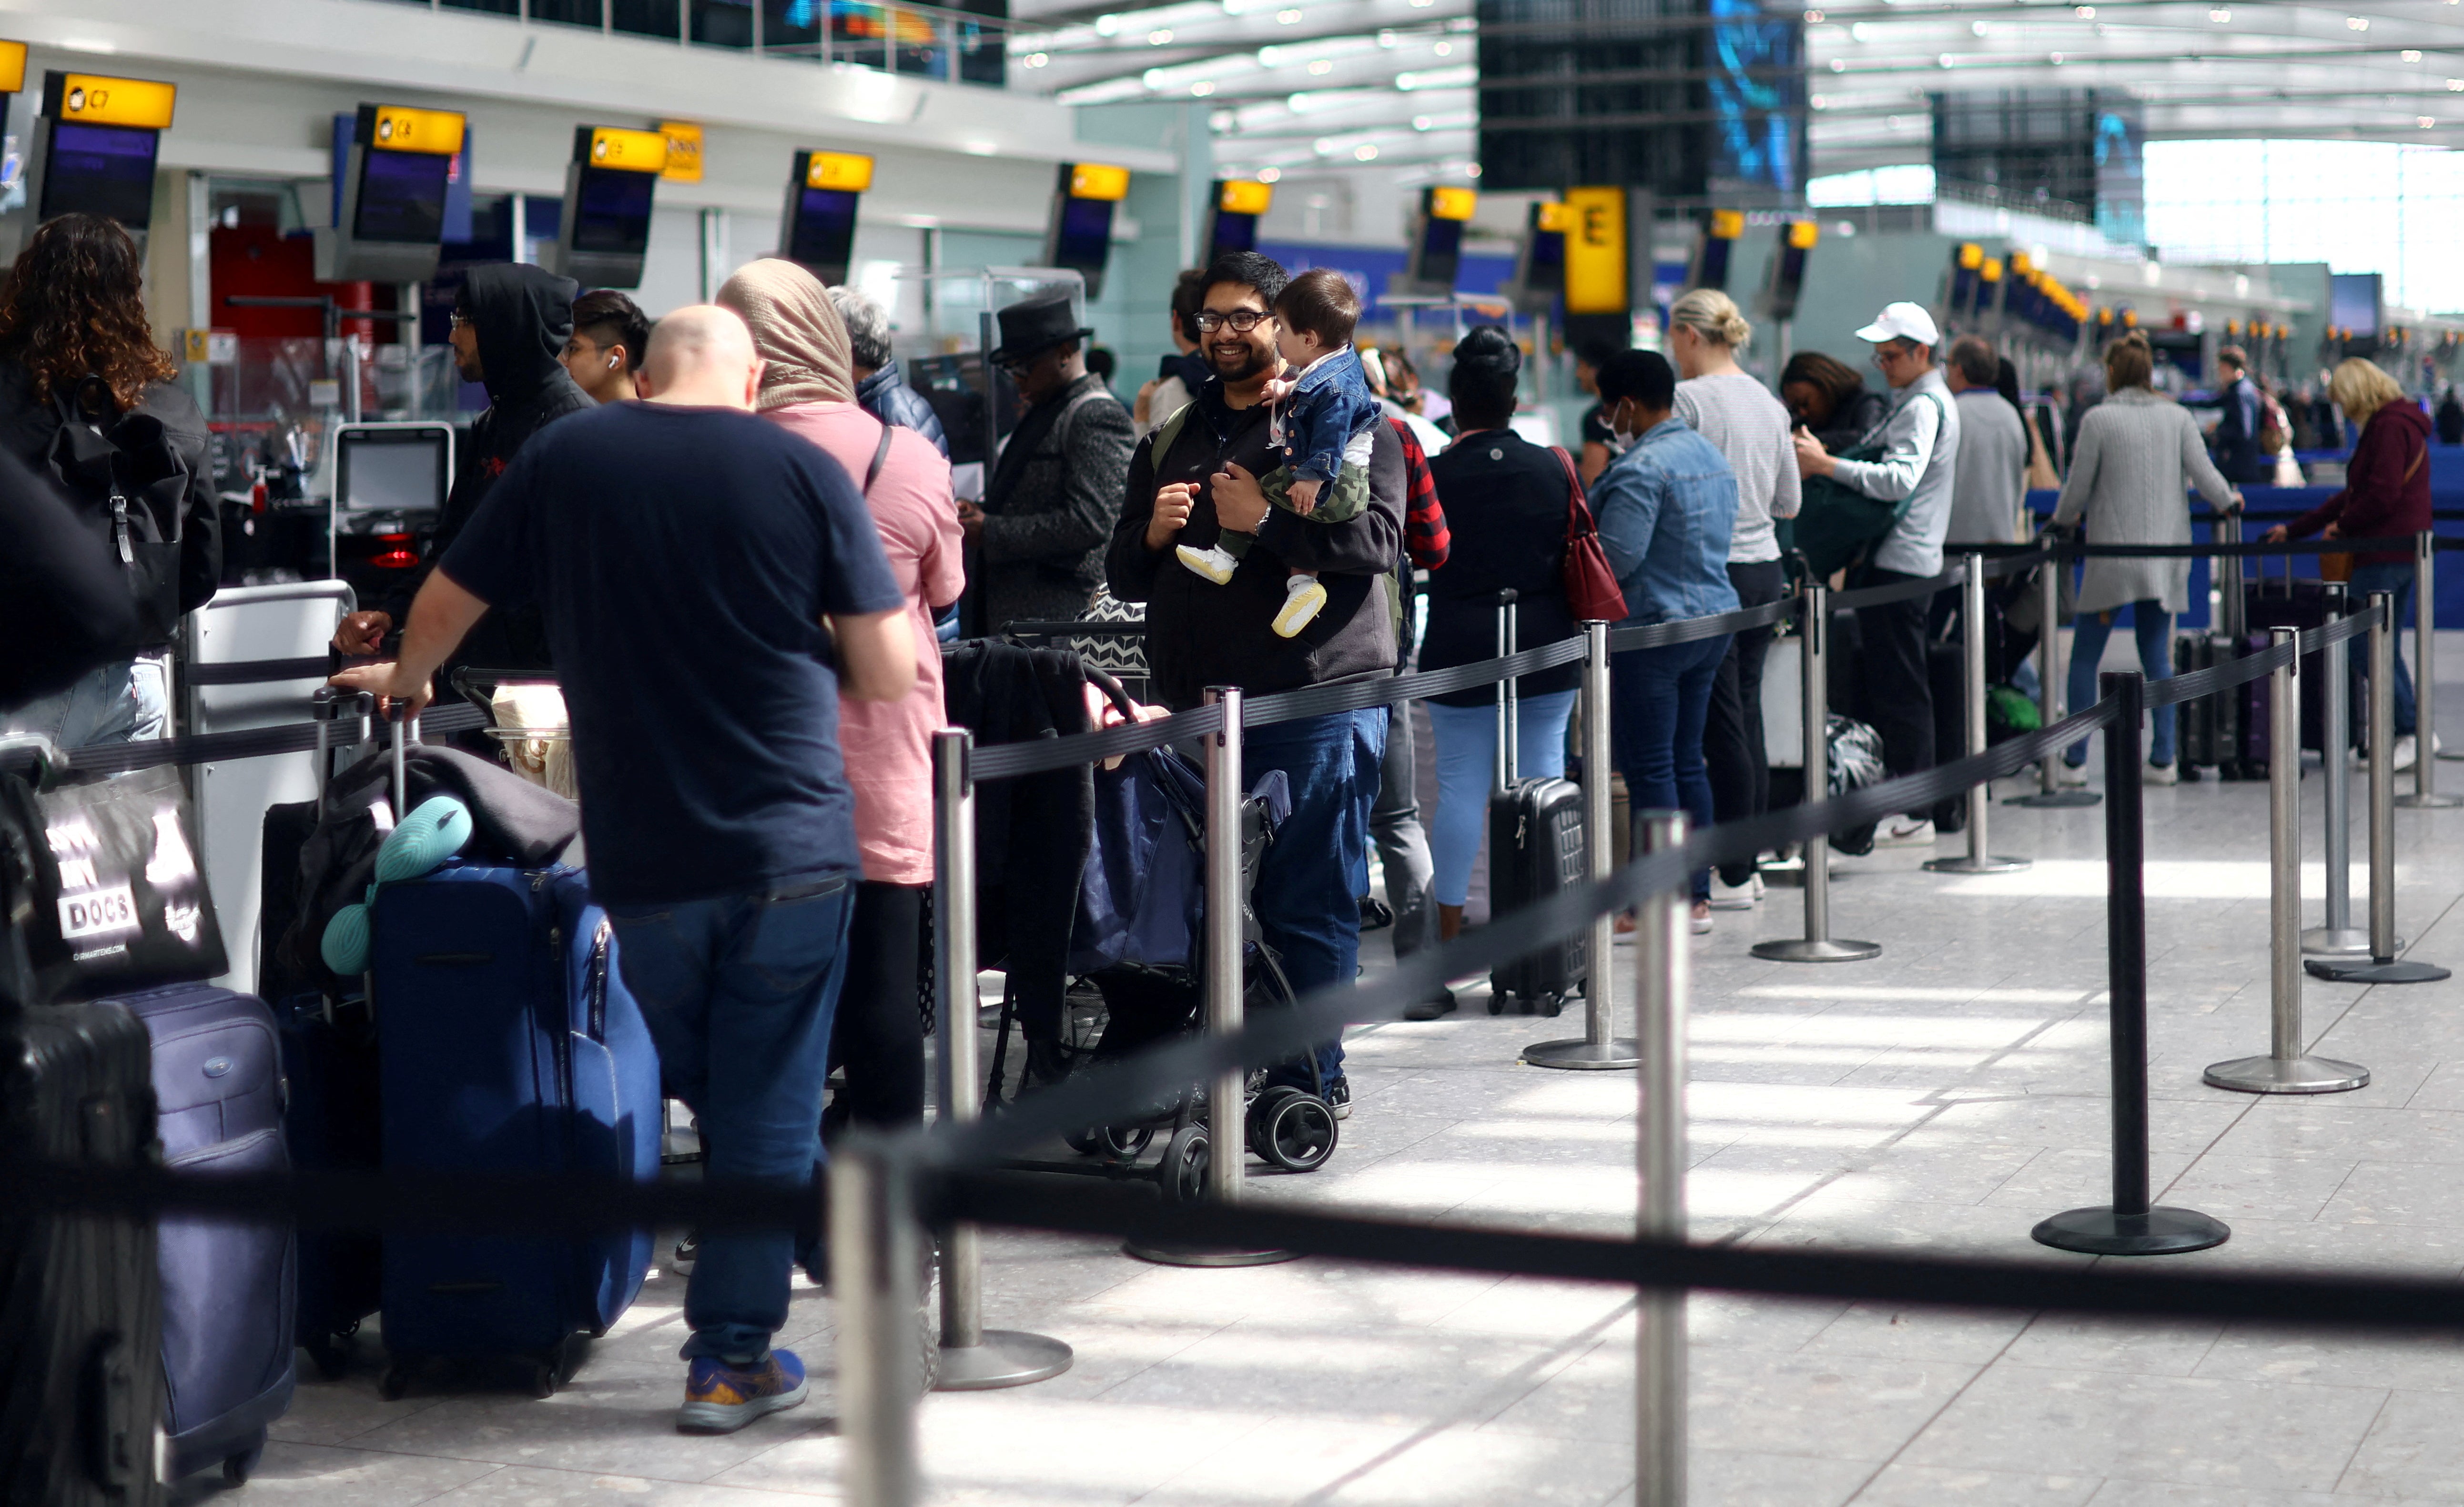 Passengers queue for check-in desks at Heathrow airport’s Terminal 5 in London